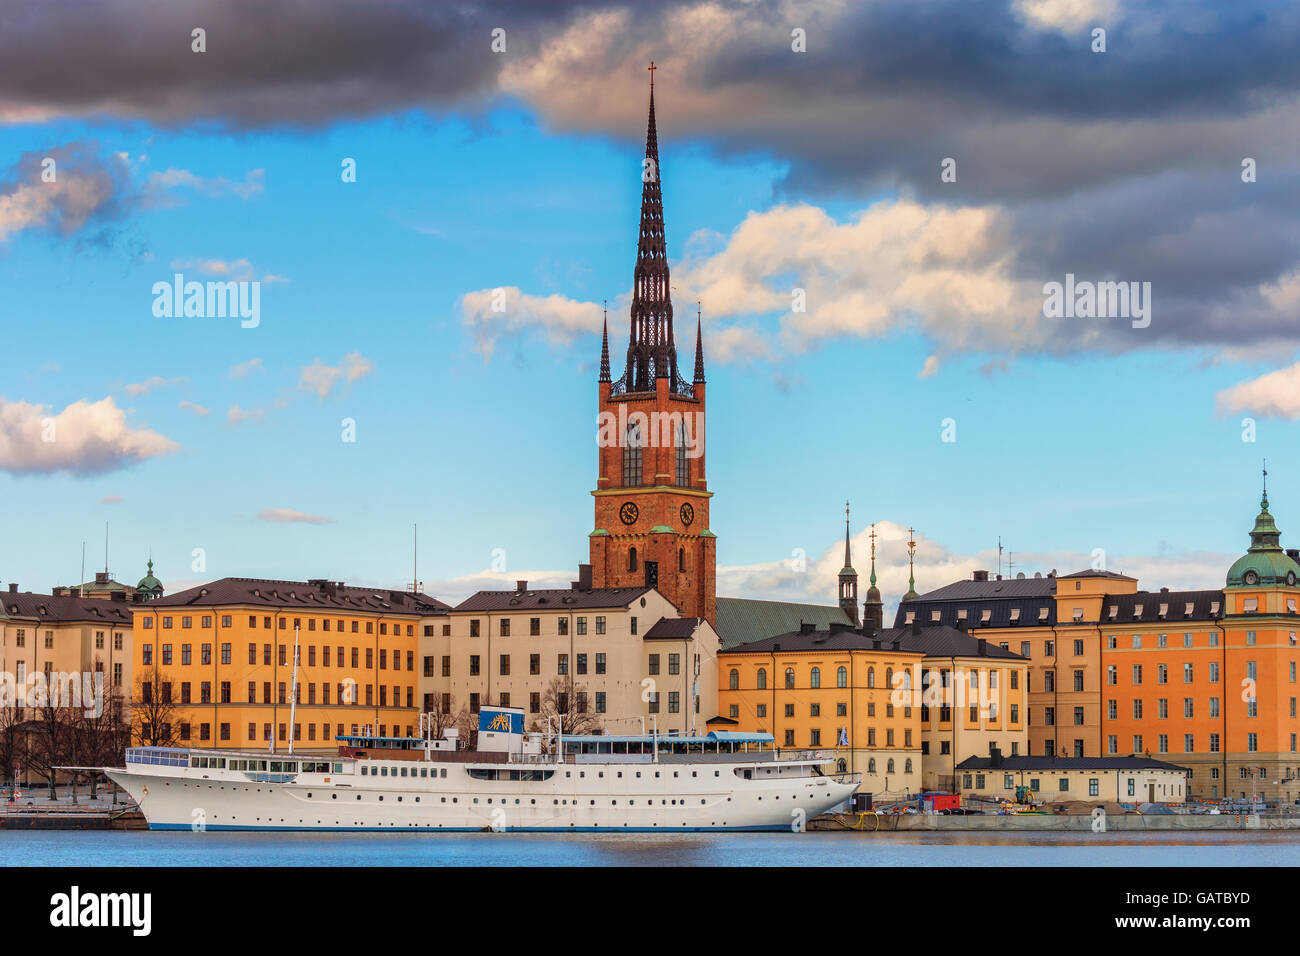 Stockholm, Sweden - March 30, 2016:  Panorama of the Old Town (Gamla Stan) in Stockholm, Sweden.  Gamla Stan is the old town of  Stock Photo